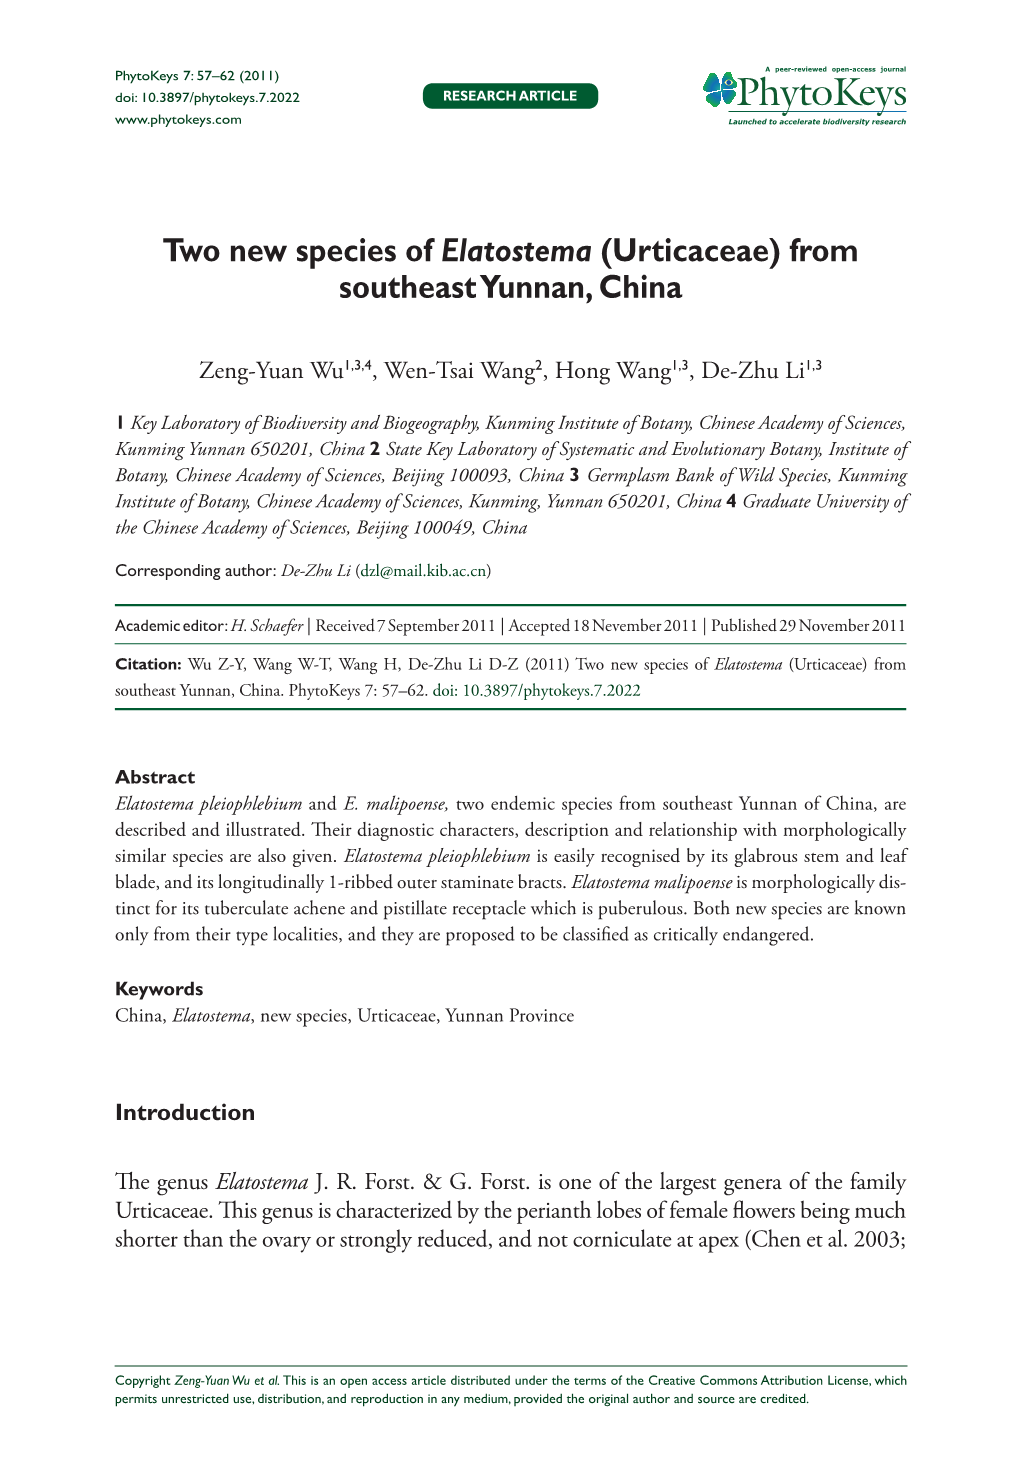 Two New Species of Elatostema (Urticaceae) from Southeast Yunnan, China